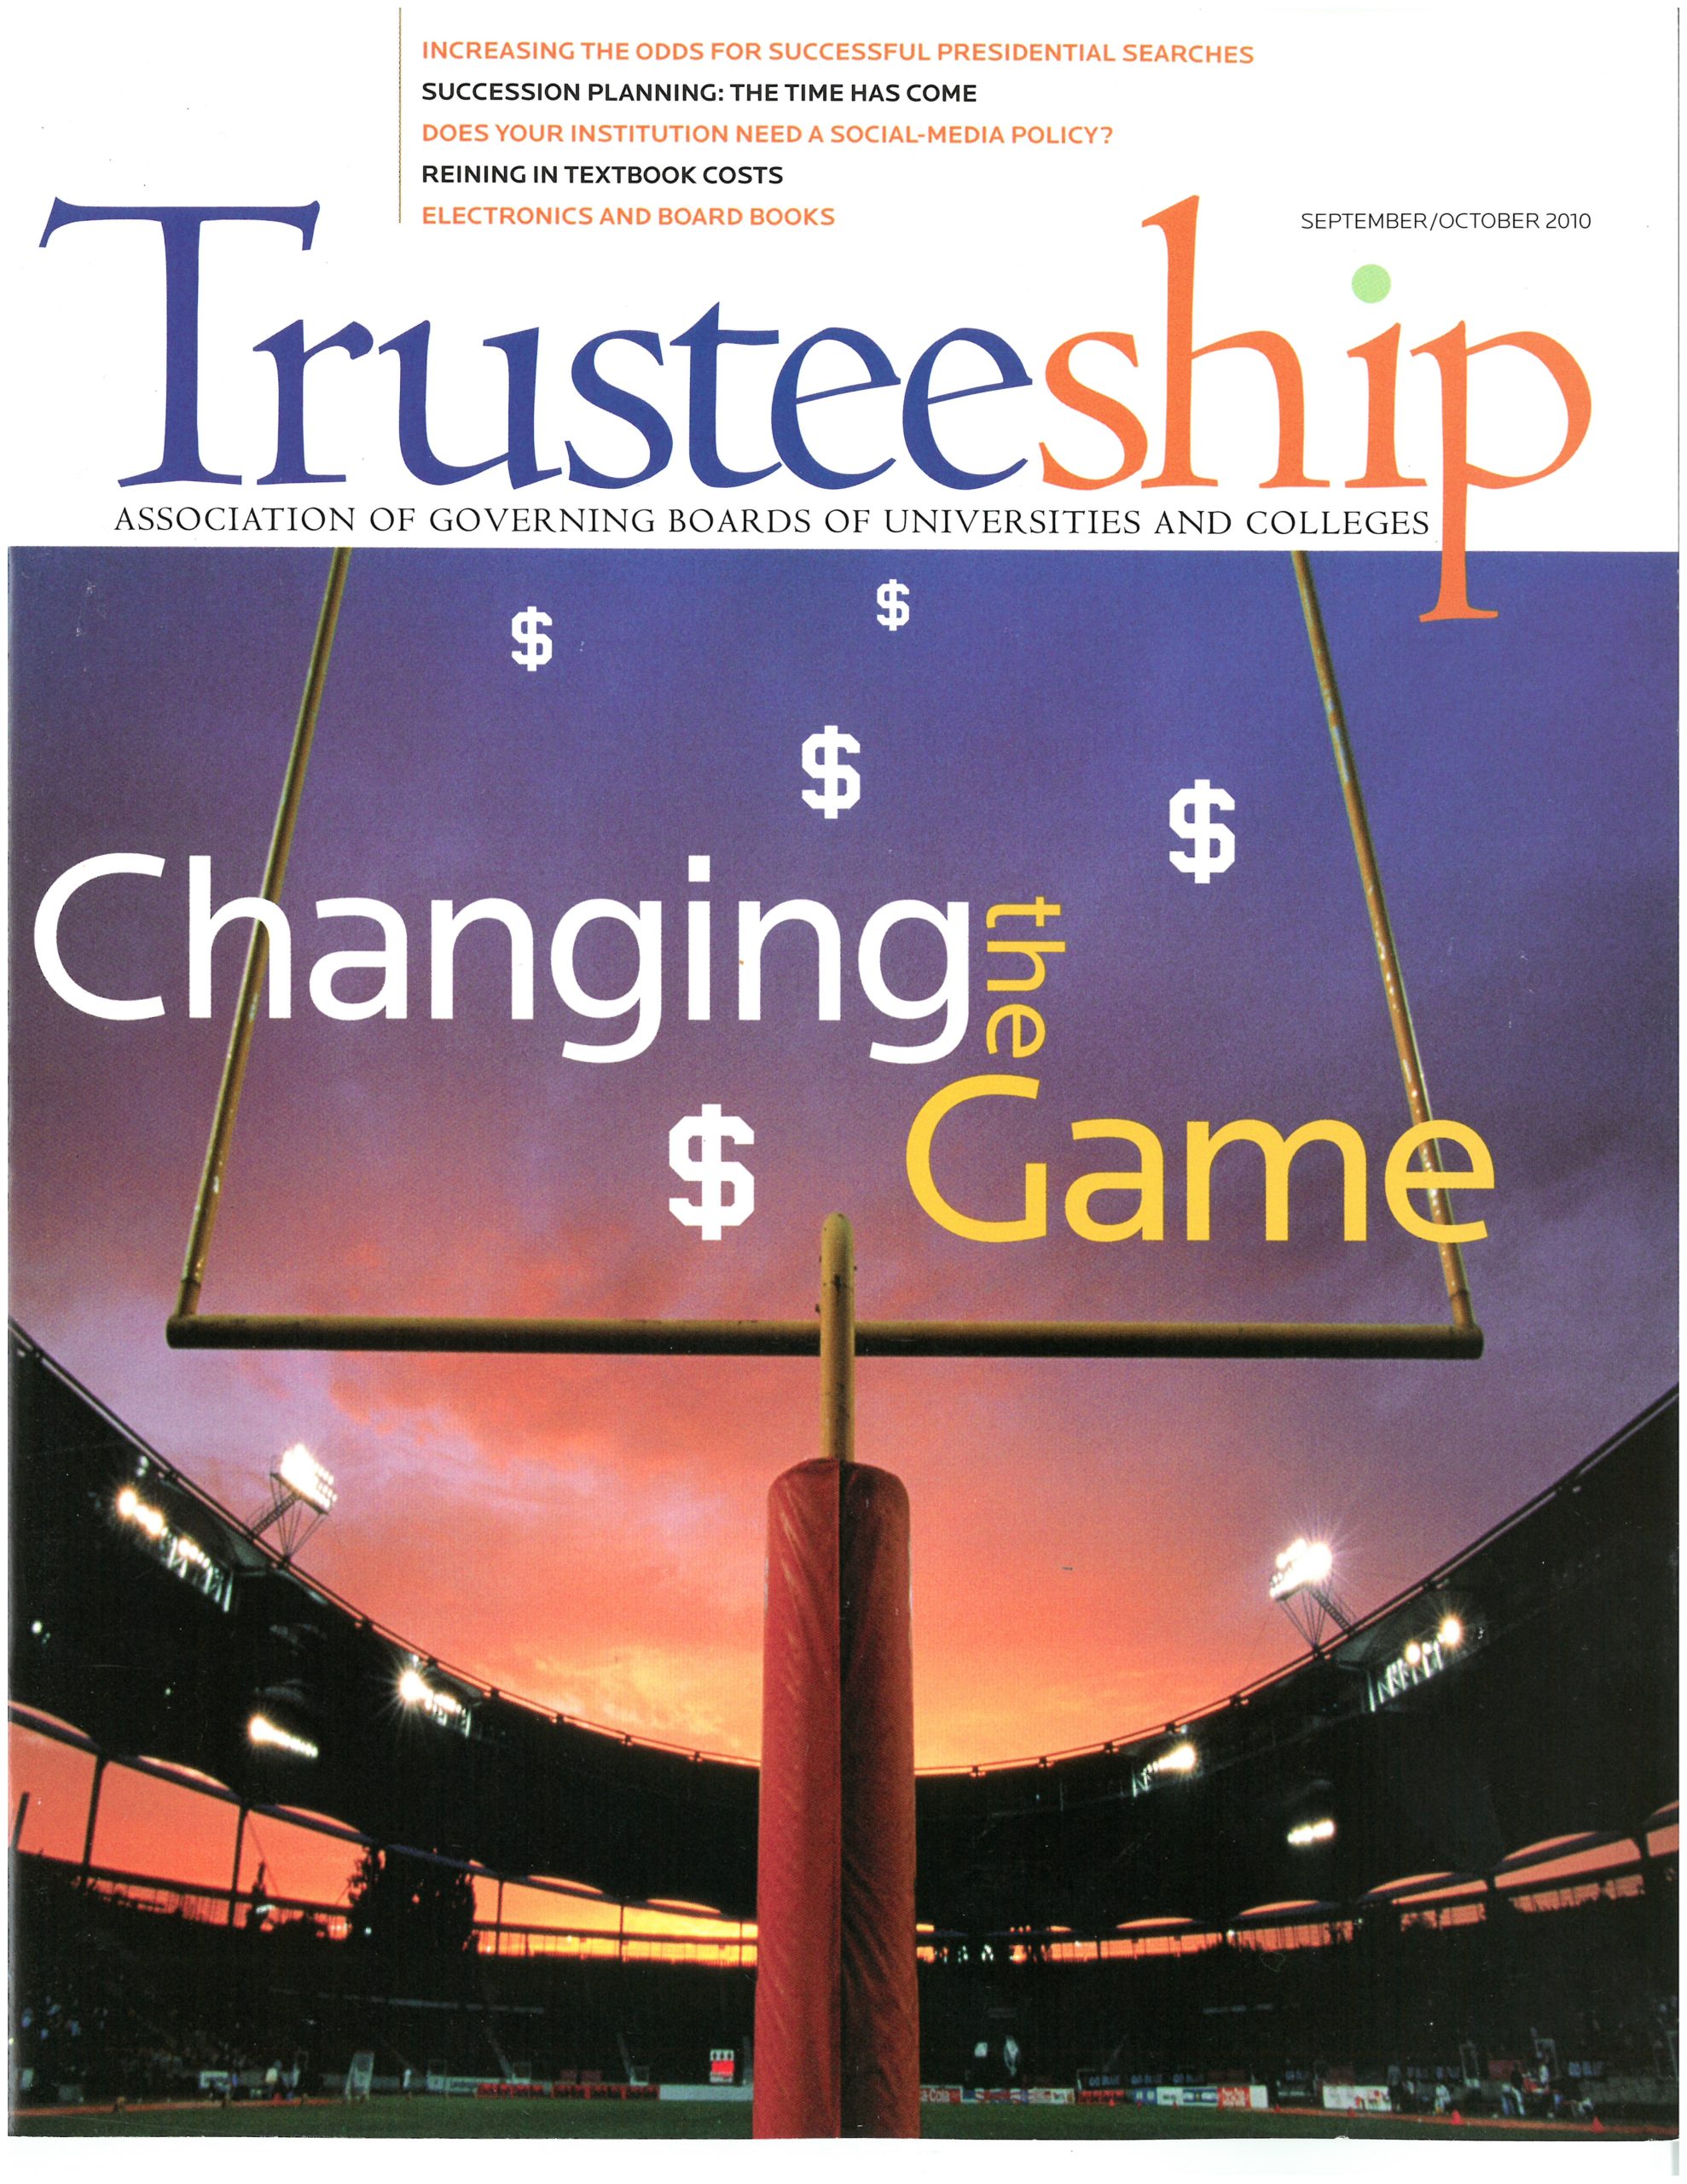 AGB Trusteeship Magazine September/October 2010 with cover article "Changing the Game"